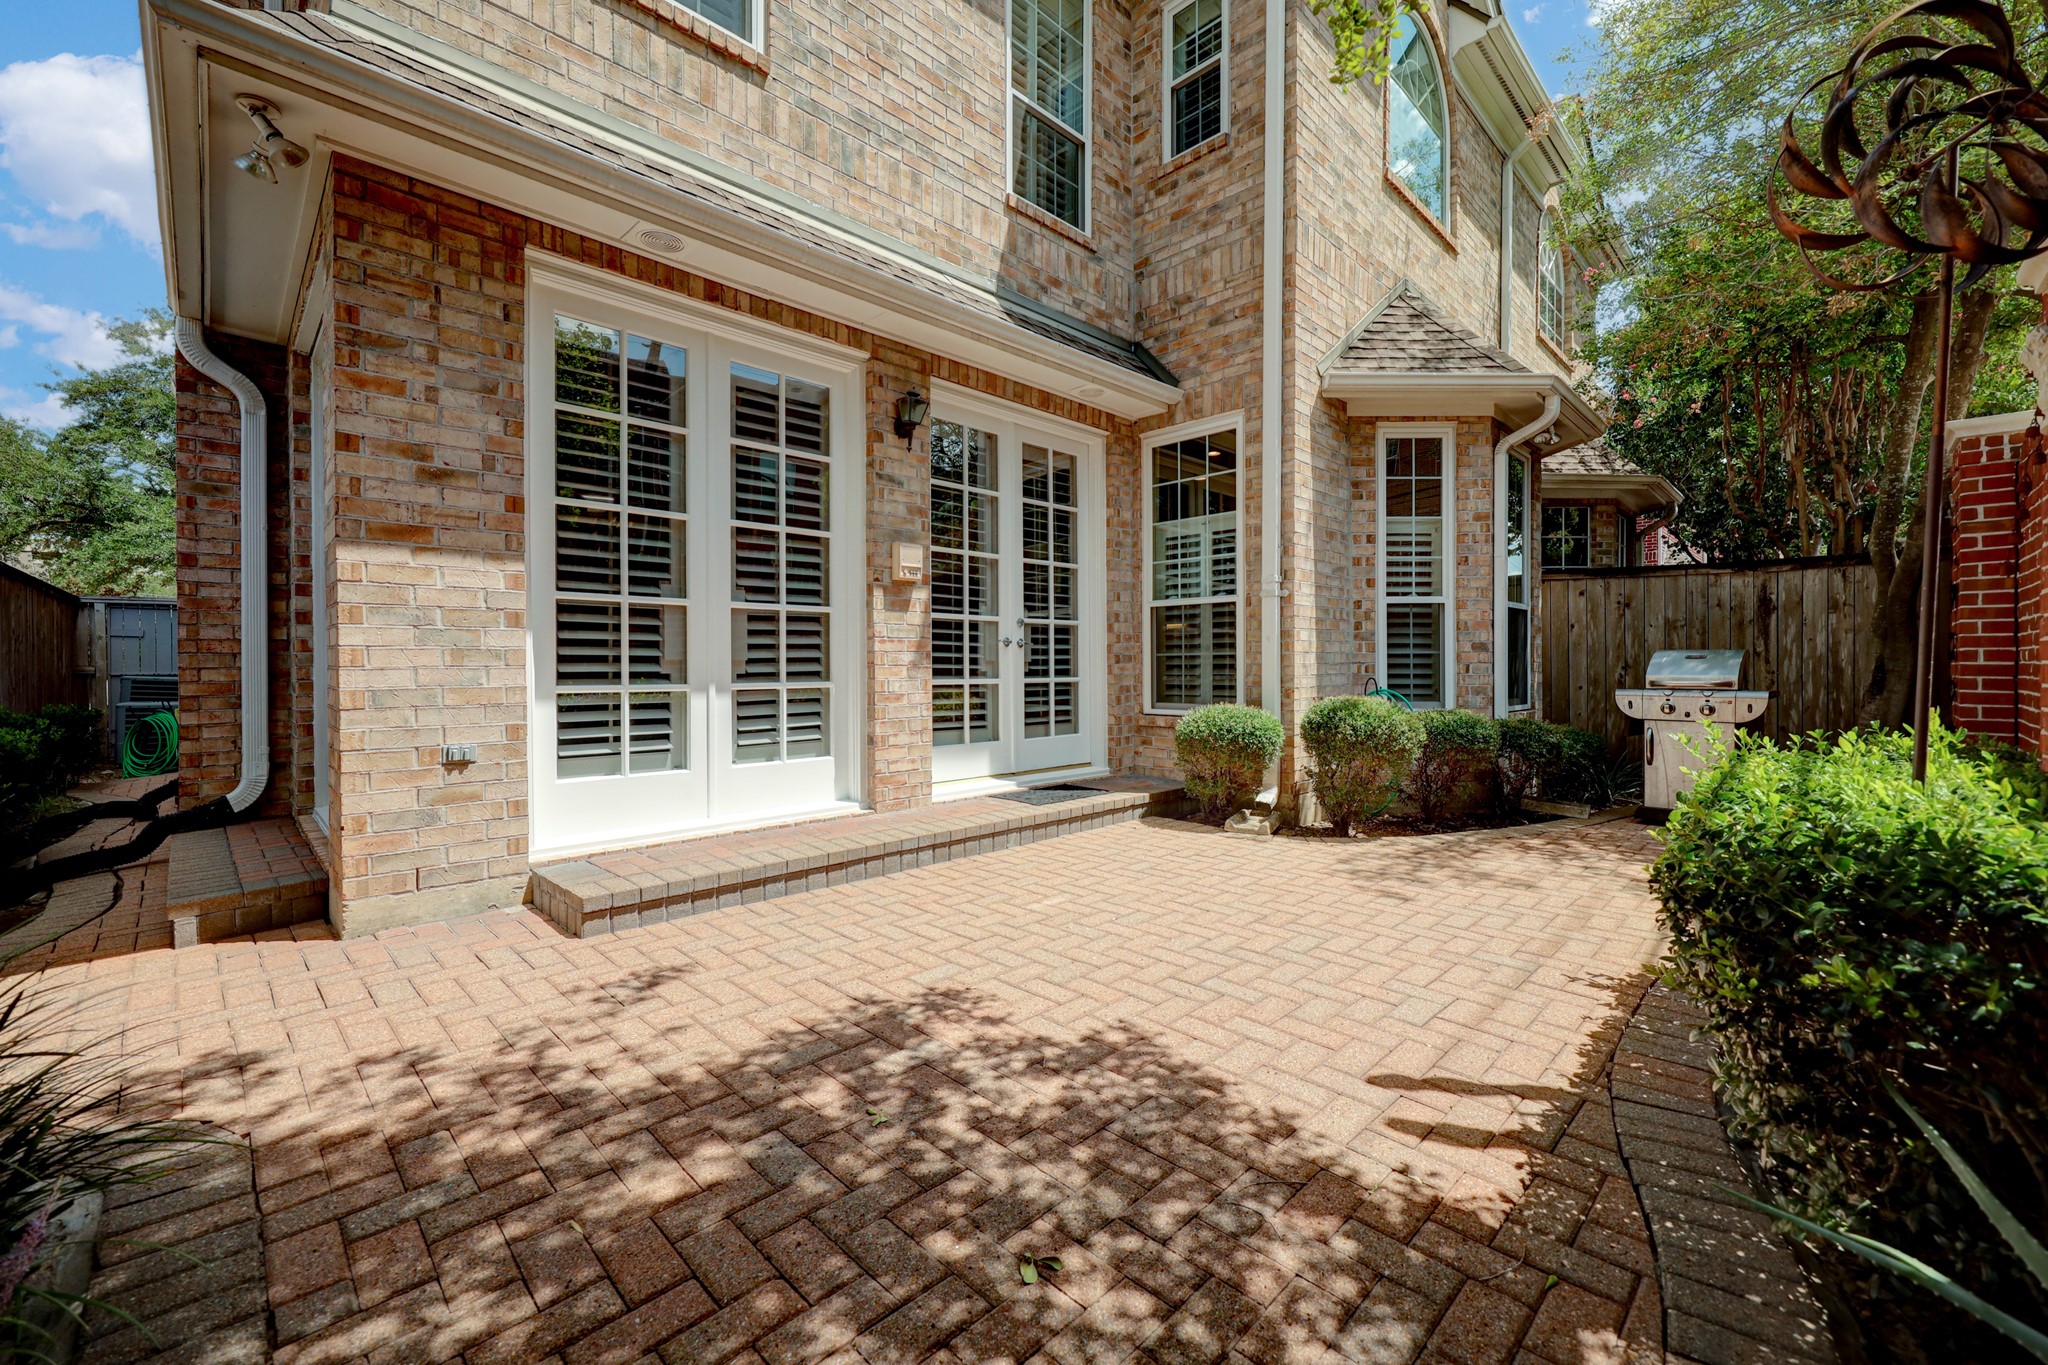 The back patio can be accessed through the French Doors located in the family room.